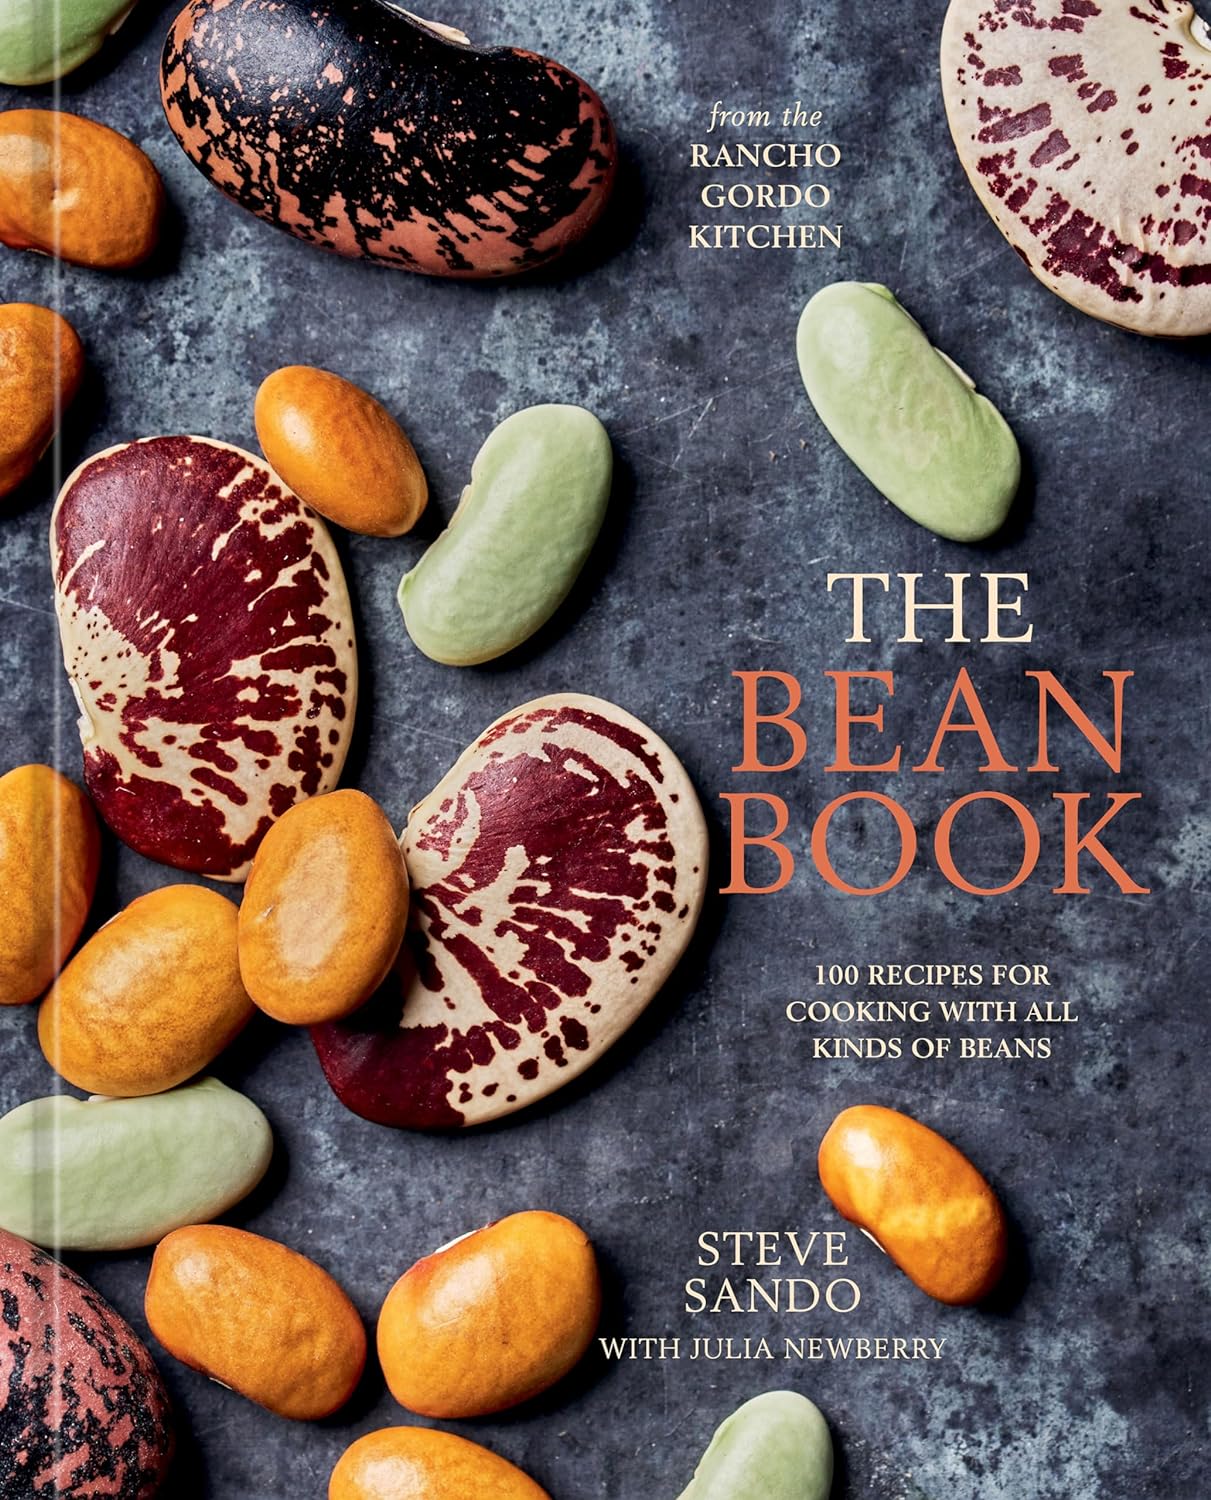 *Pre-order* The Bean Book: 100 Recipes for Cooking with All Kinds of Beans, from the Rancho Gordo Kitchen (Steve Sando, Julia Newberry)